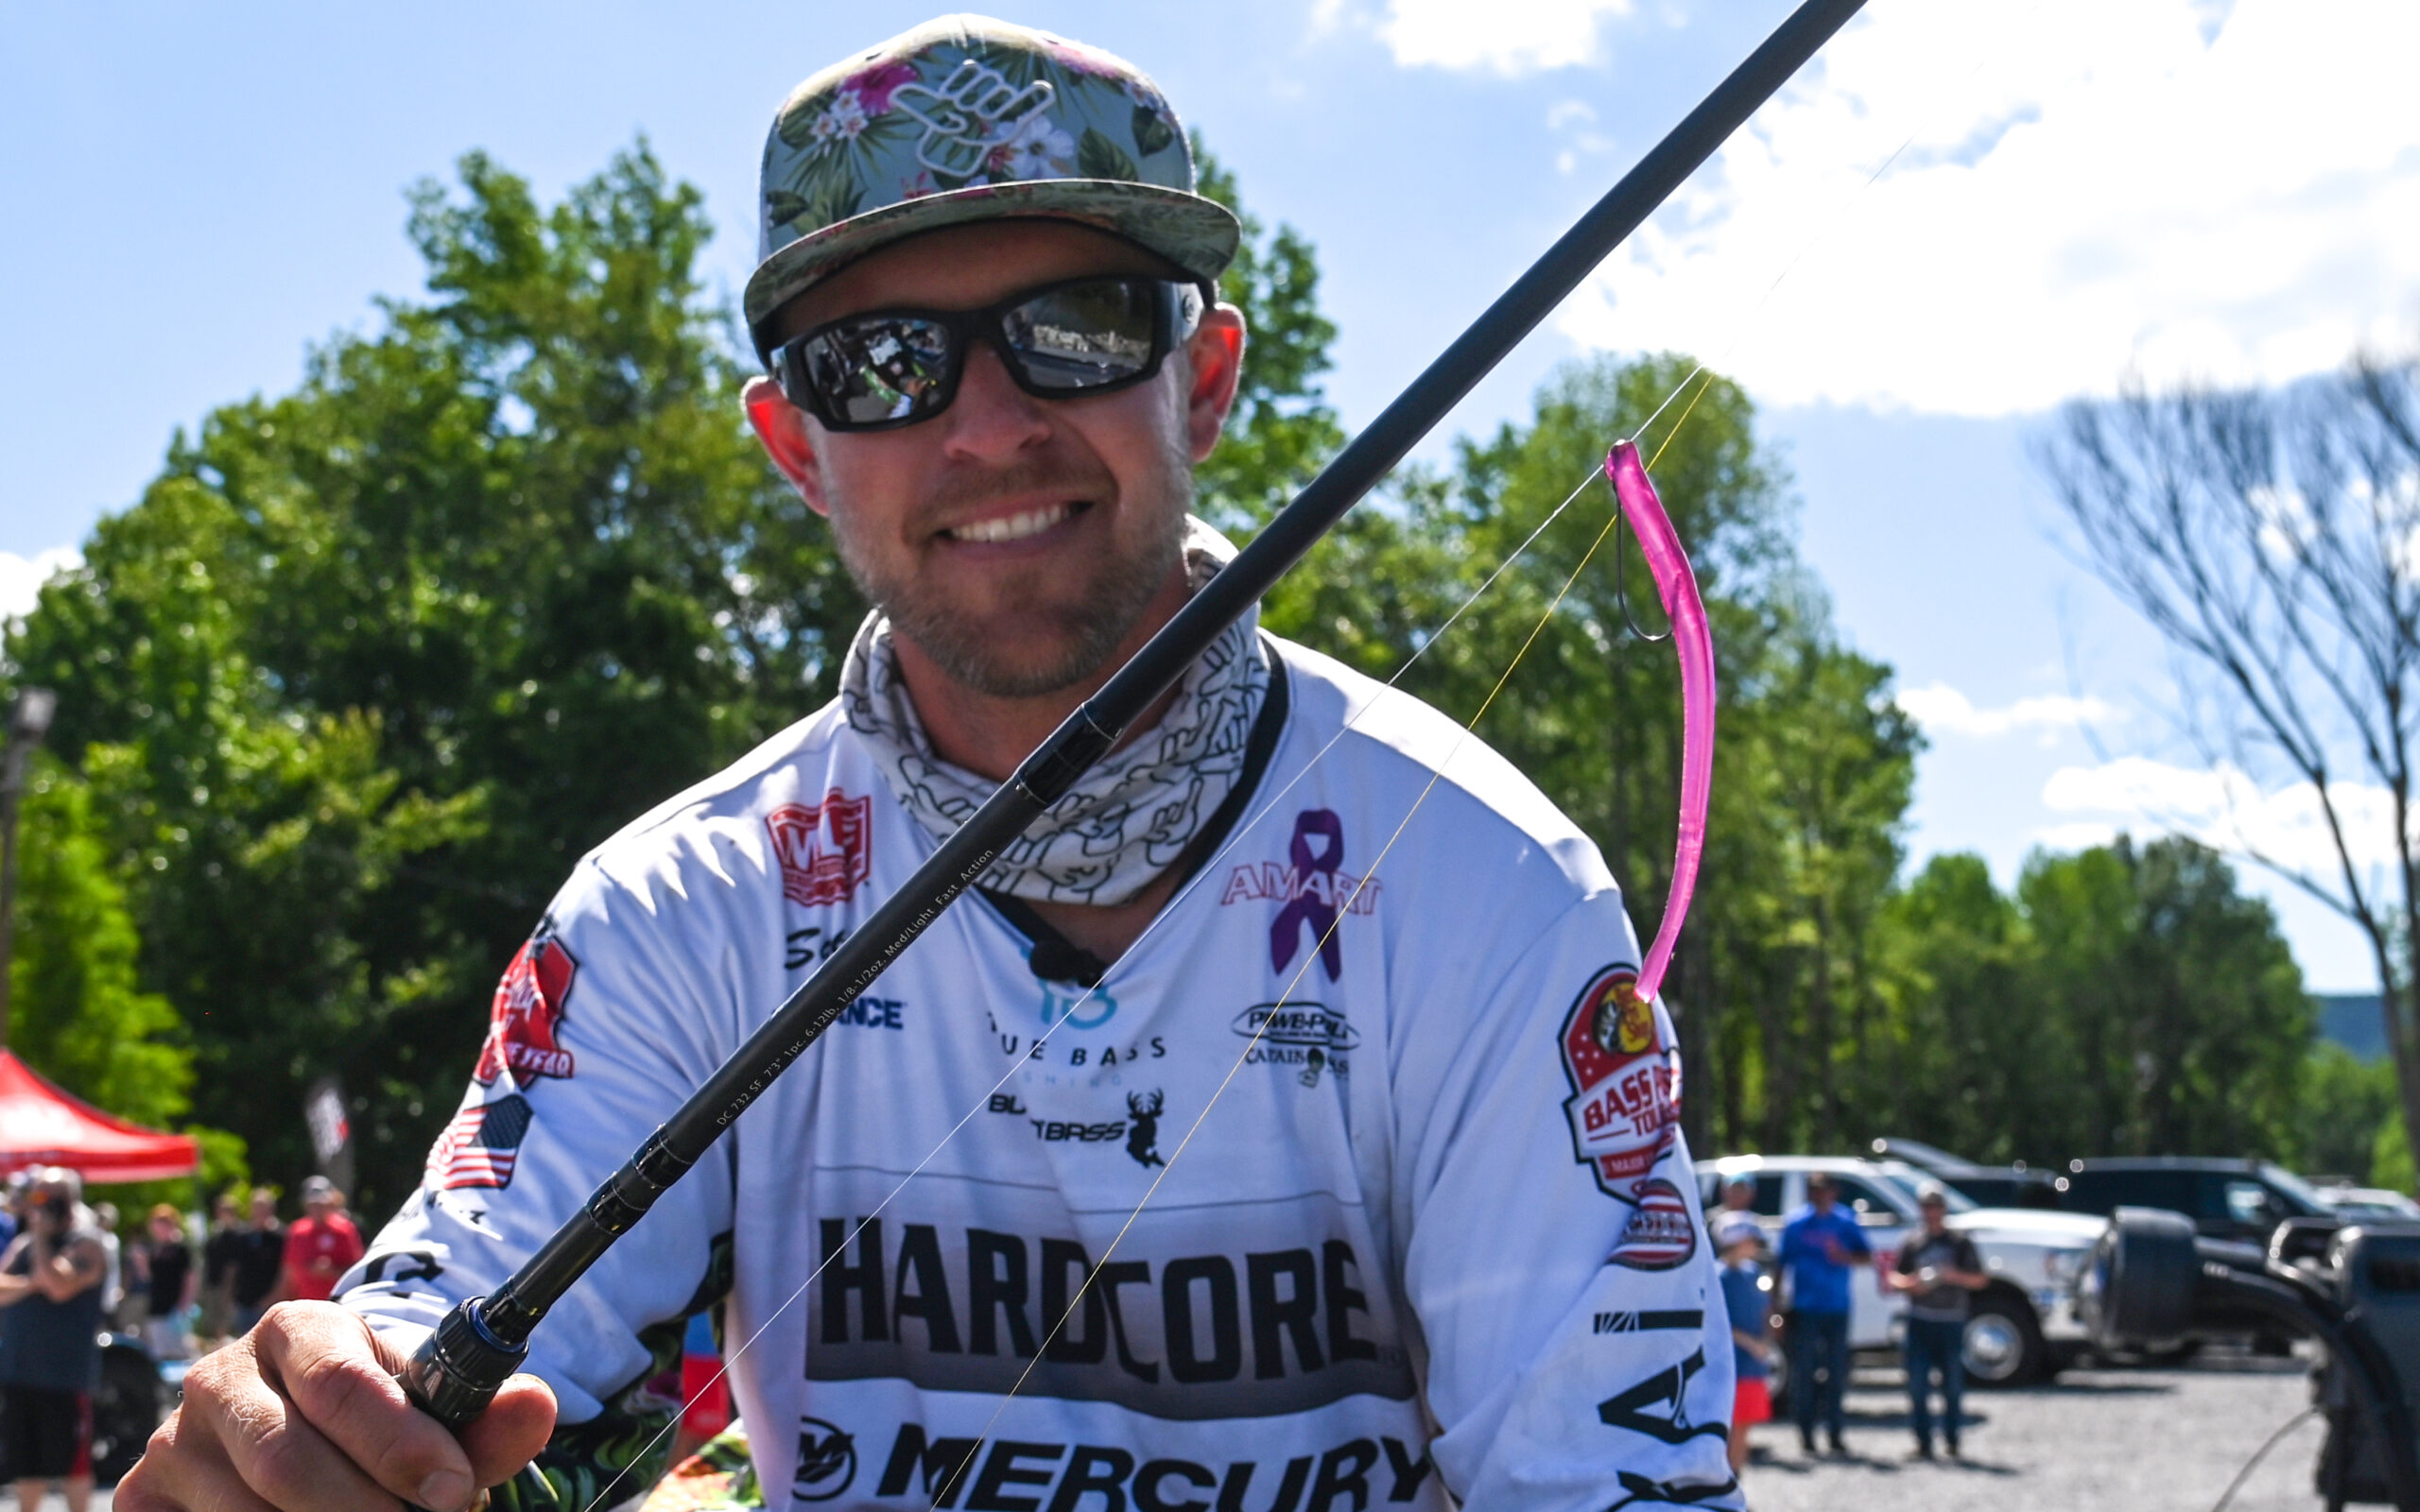 TOP 10 BAITS & PATTERNS: How the Bass Pro Tour's 10 Best Caught